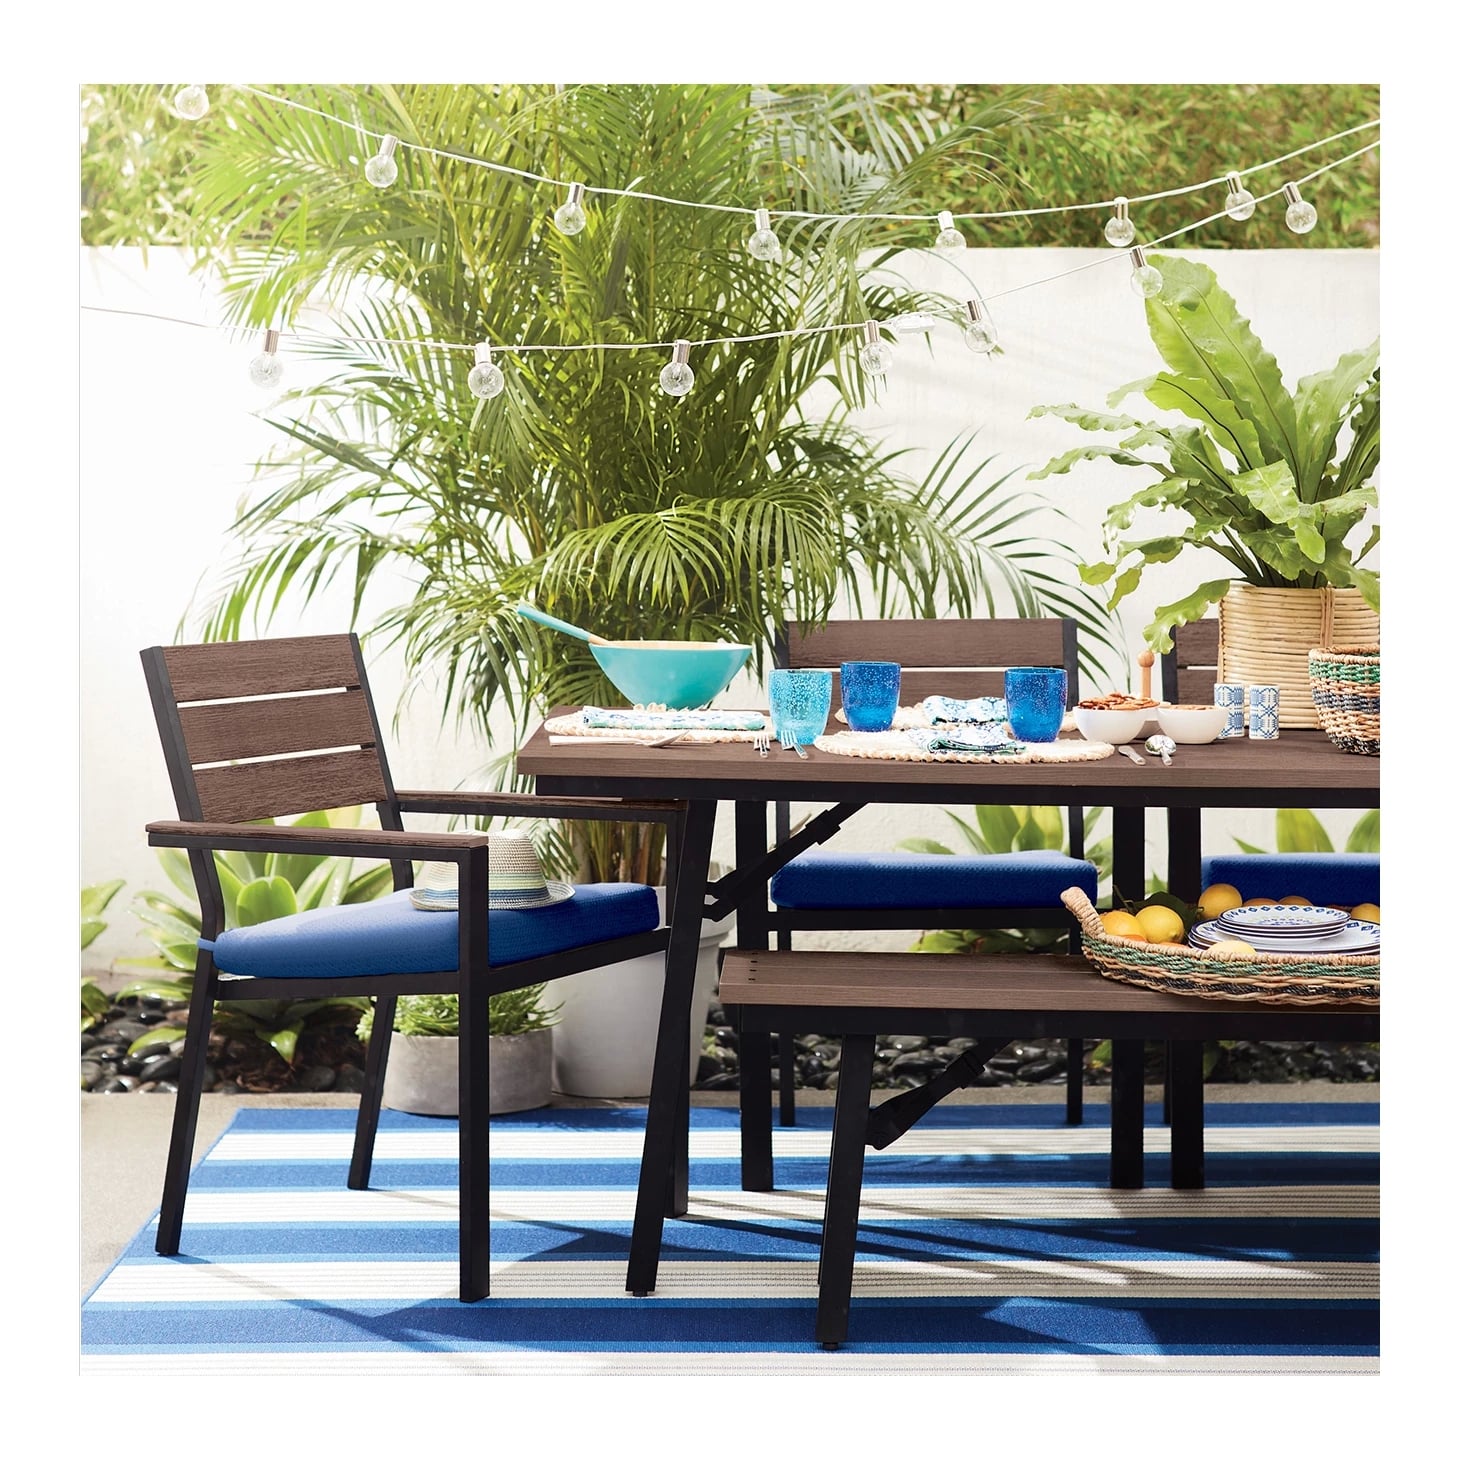 foldable outdoor dining set